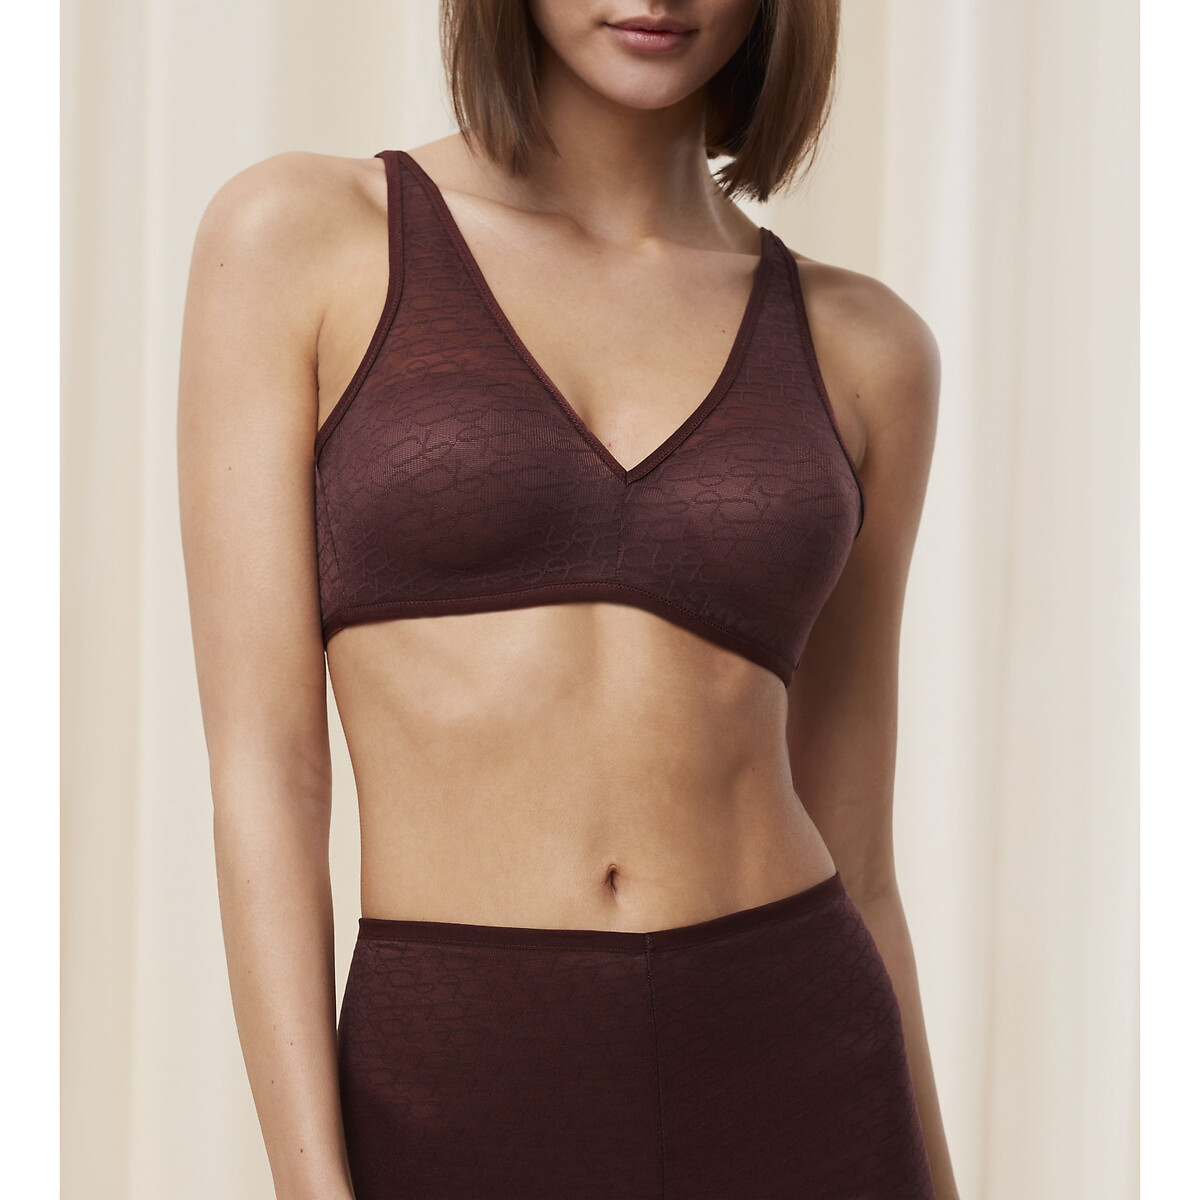 Image of Signature Sheer Bra without Underwiring